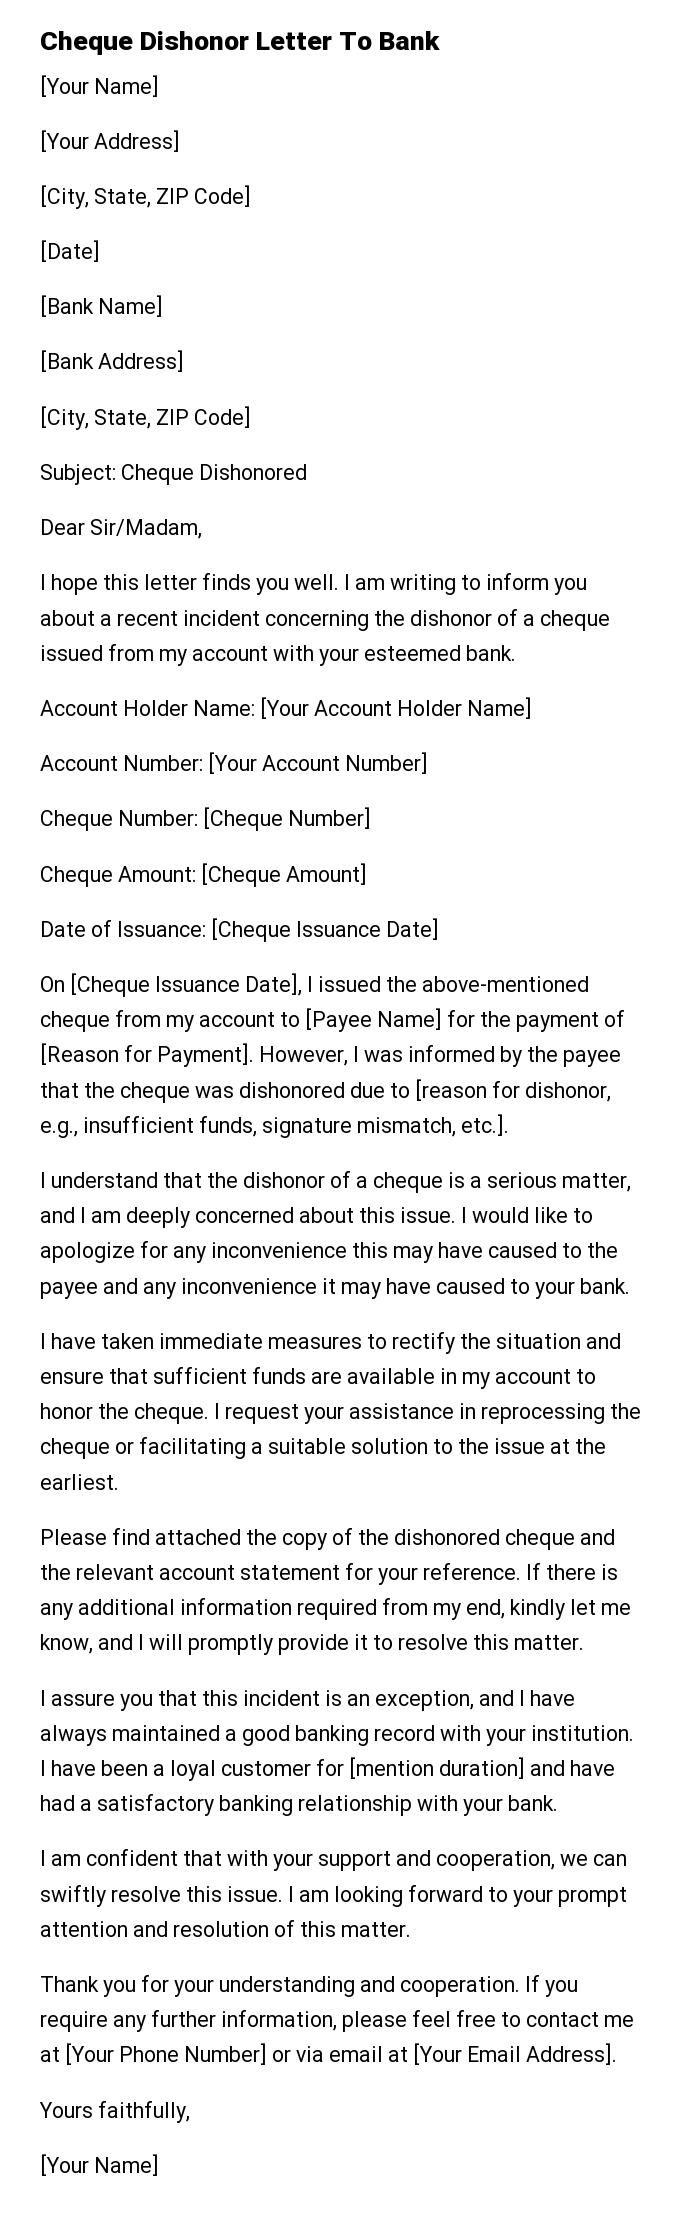 Cheque Dishonor Letter To Bank